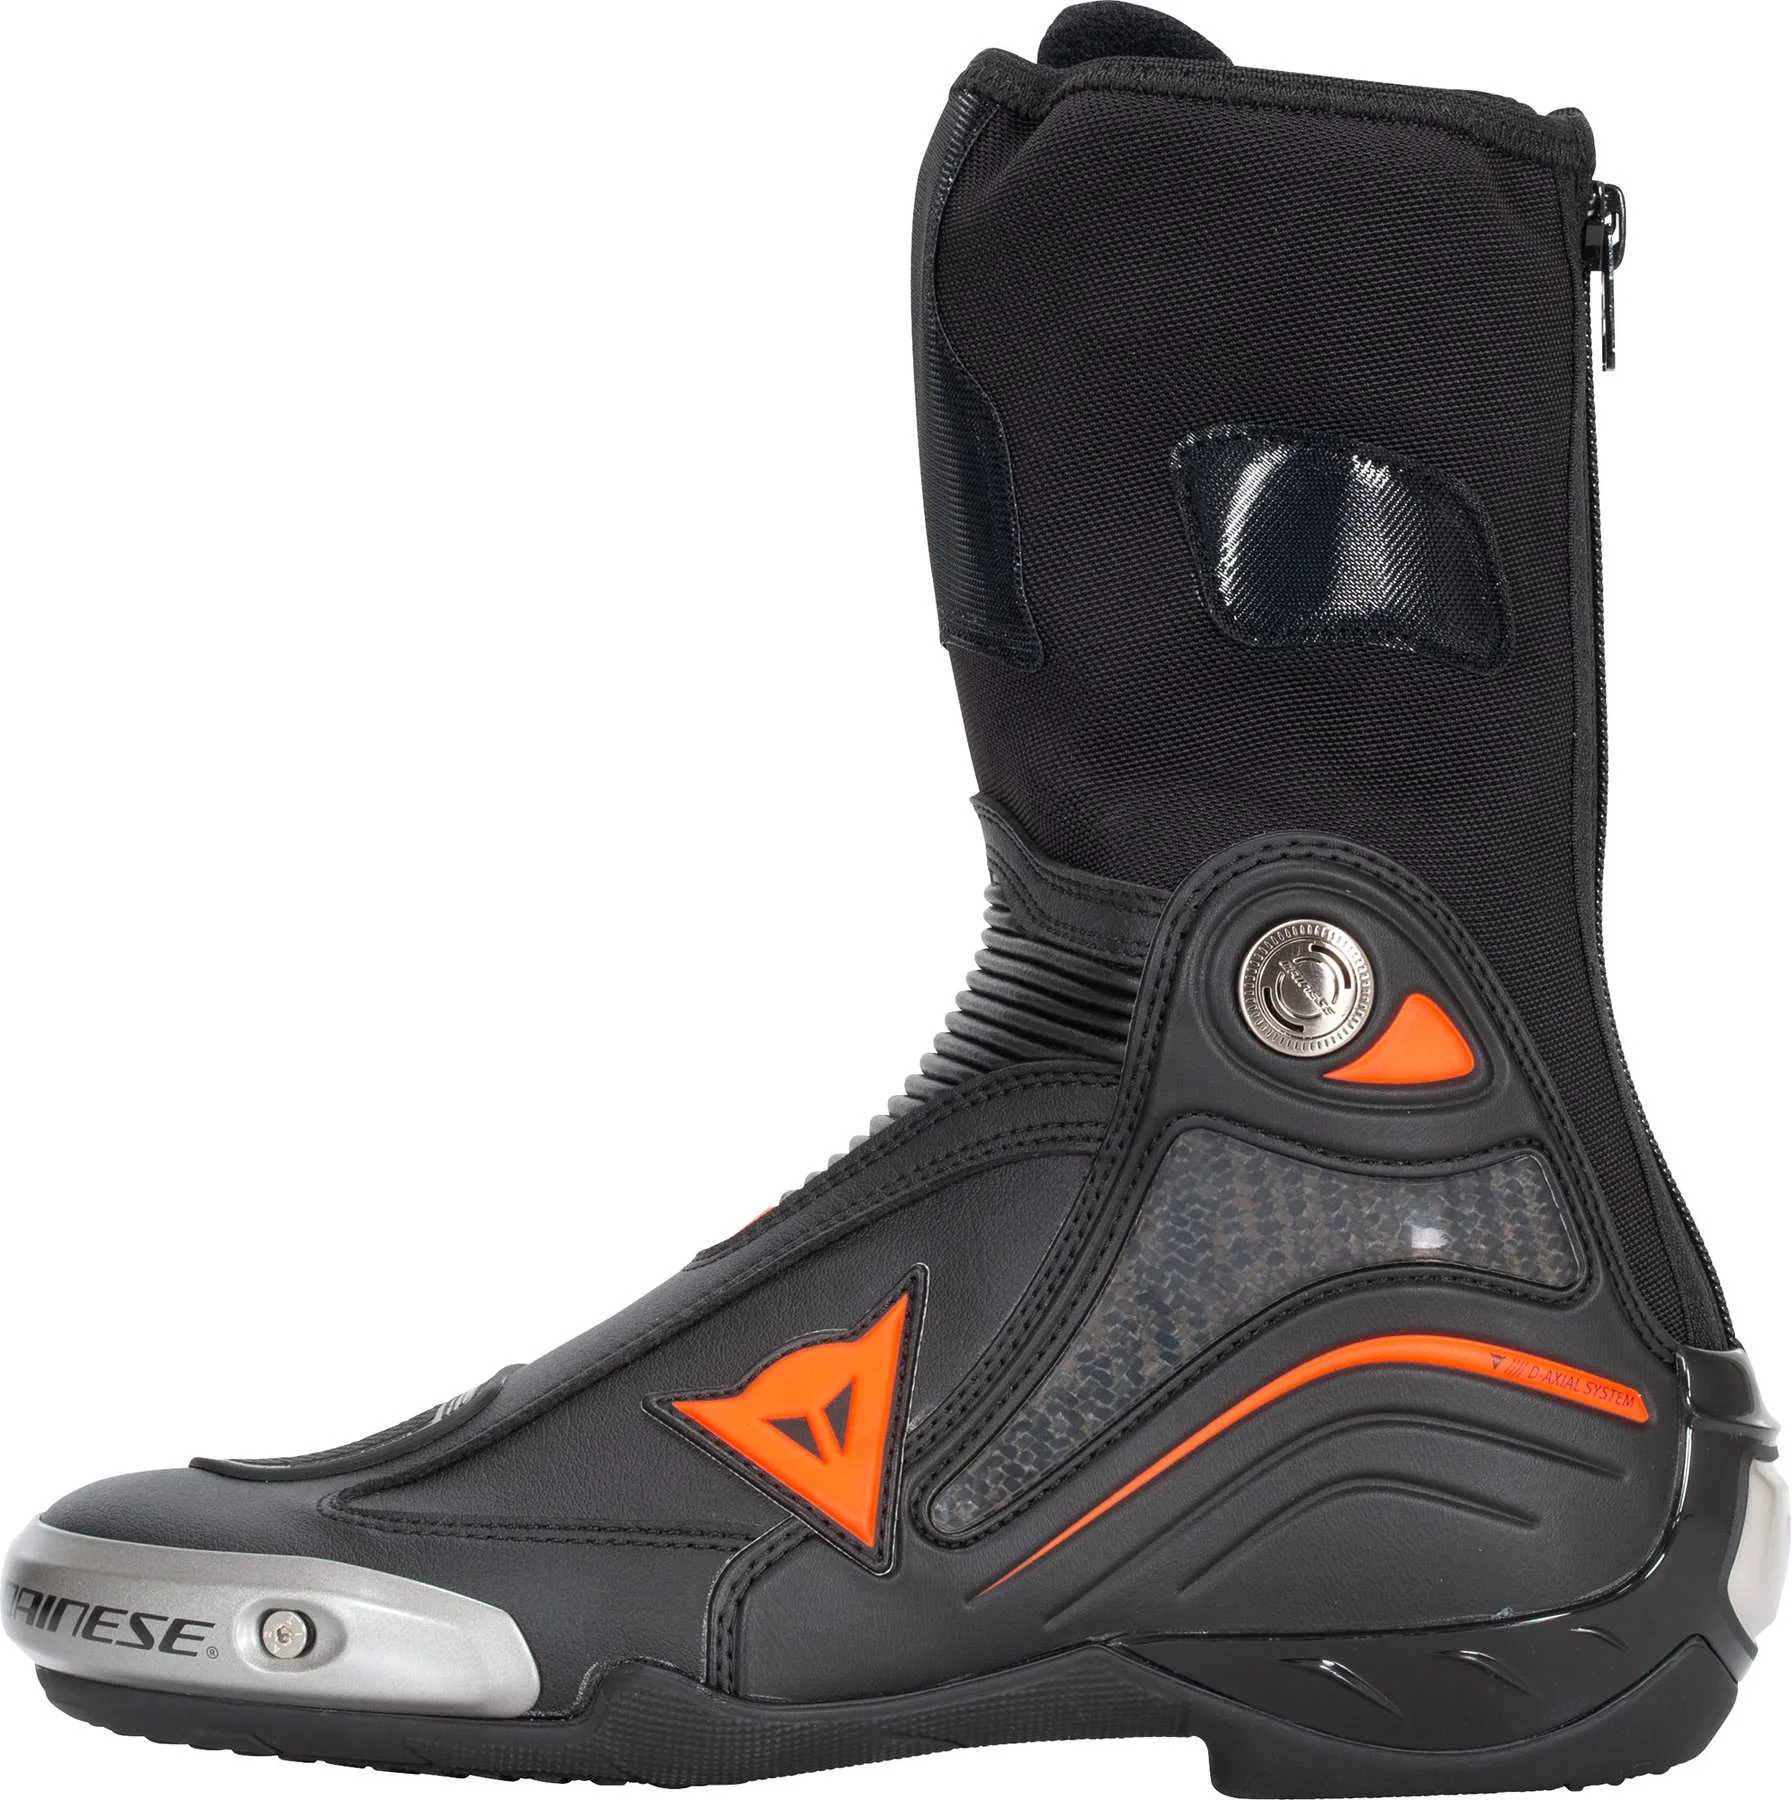 DAINESE AXIAL D1 SIZE 40